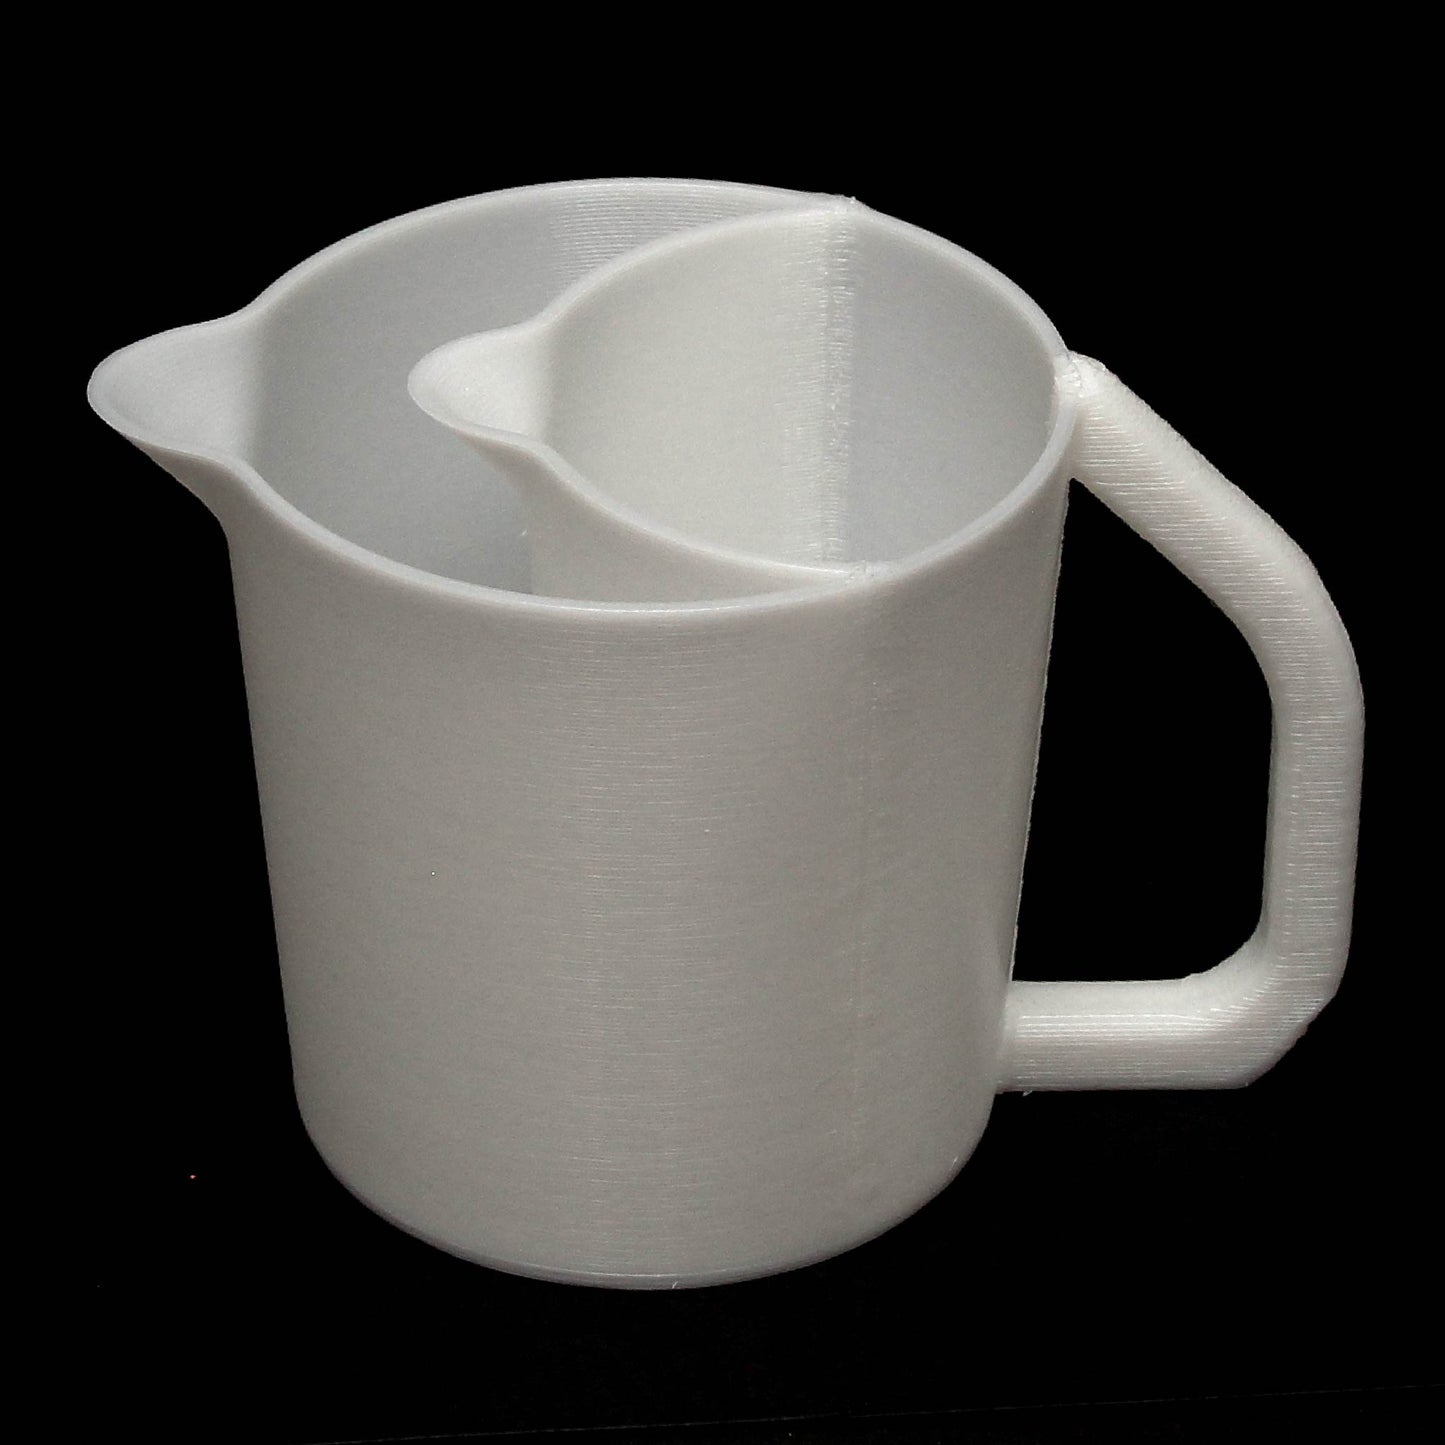 Waterfall Cup 8oz to 18oz, 2 or 3 slots